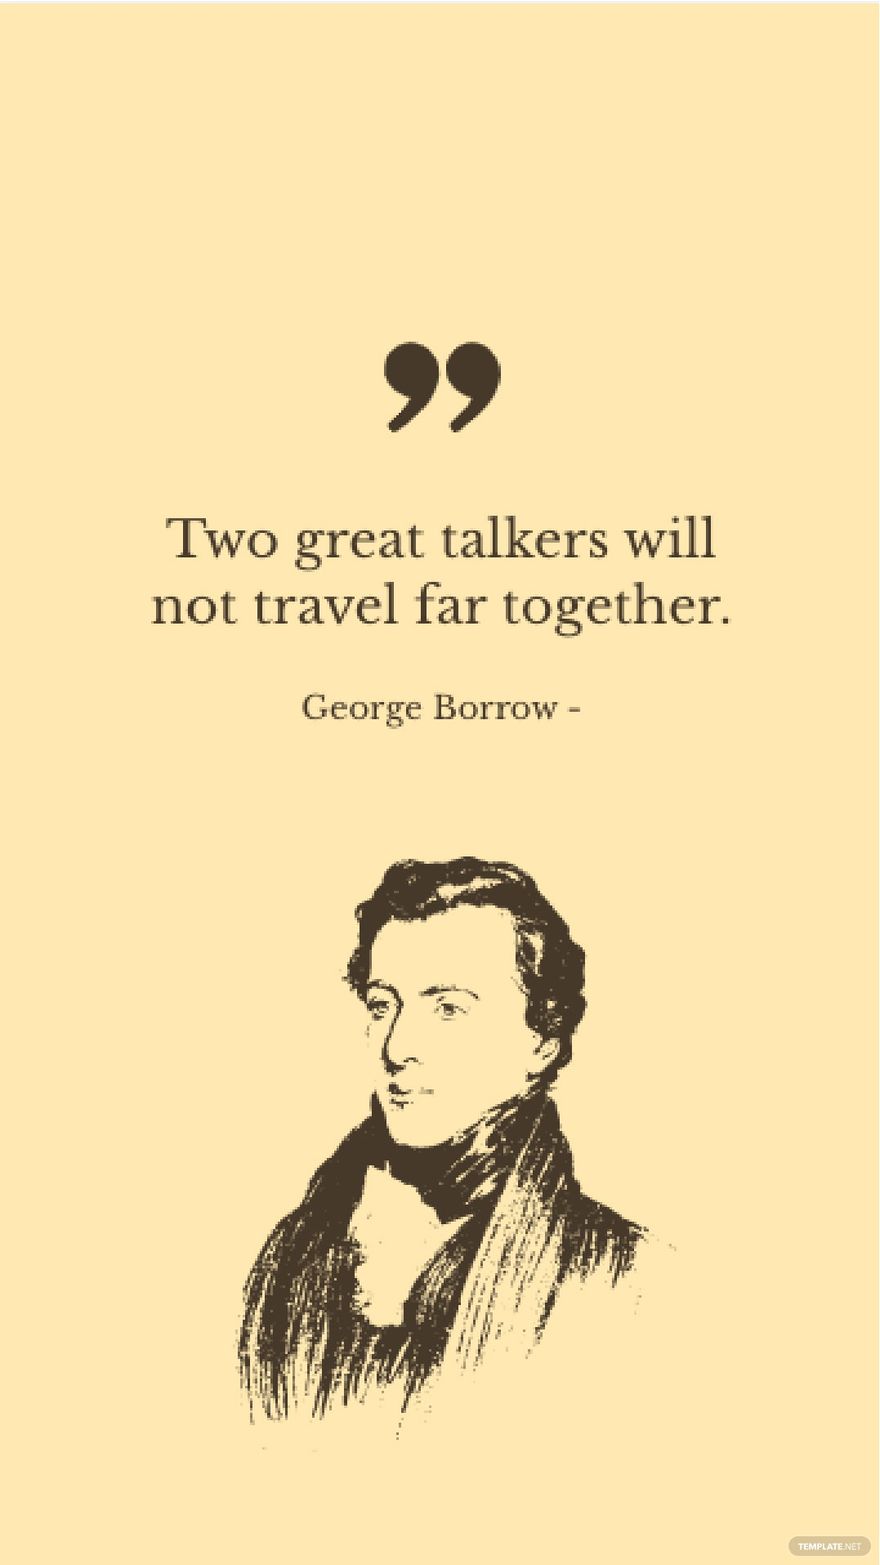 Free George Borrow - Two great talkers will not travel far together.